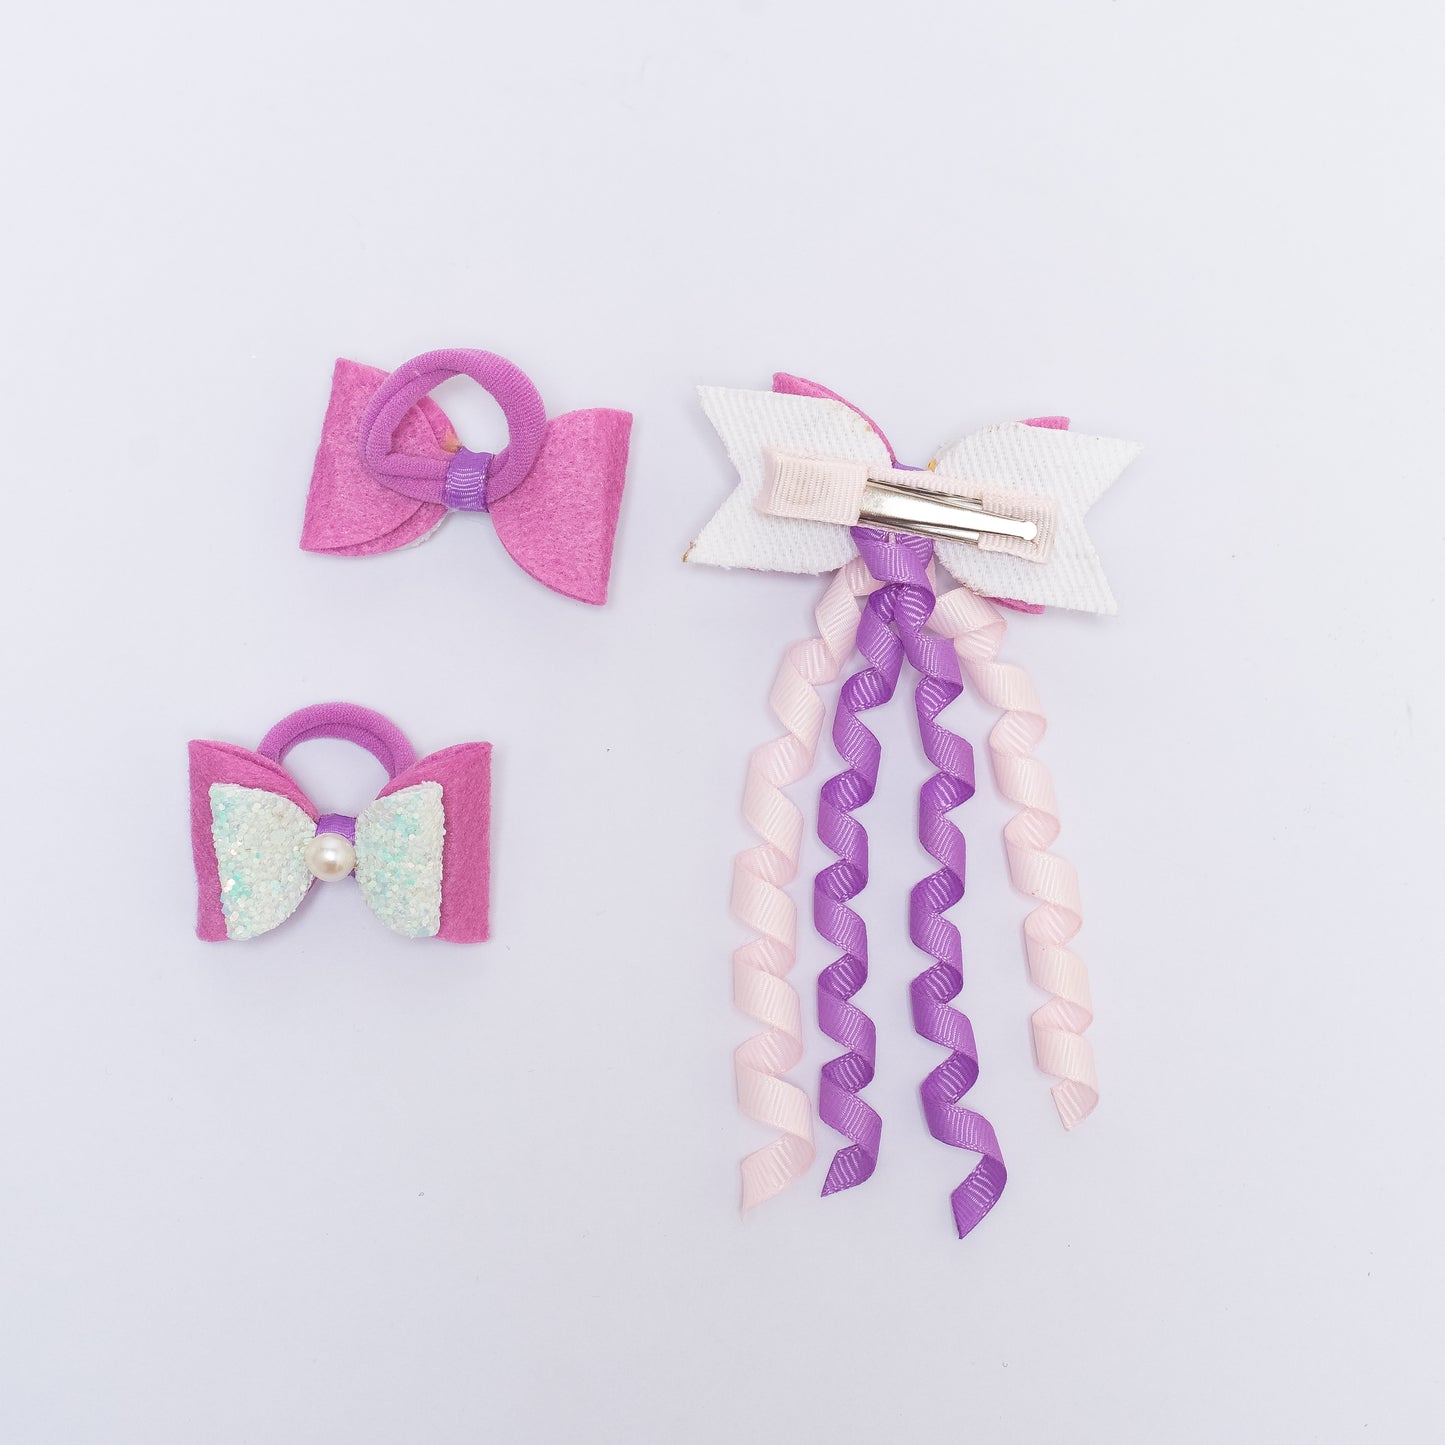 Combo: 1 Dangler Hair-pin and 2 Rubberbands with Fancy Shimmer Bow for Party - Light Blue, Light Pink, Purple